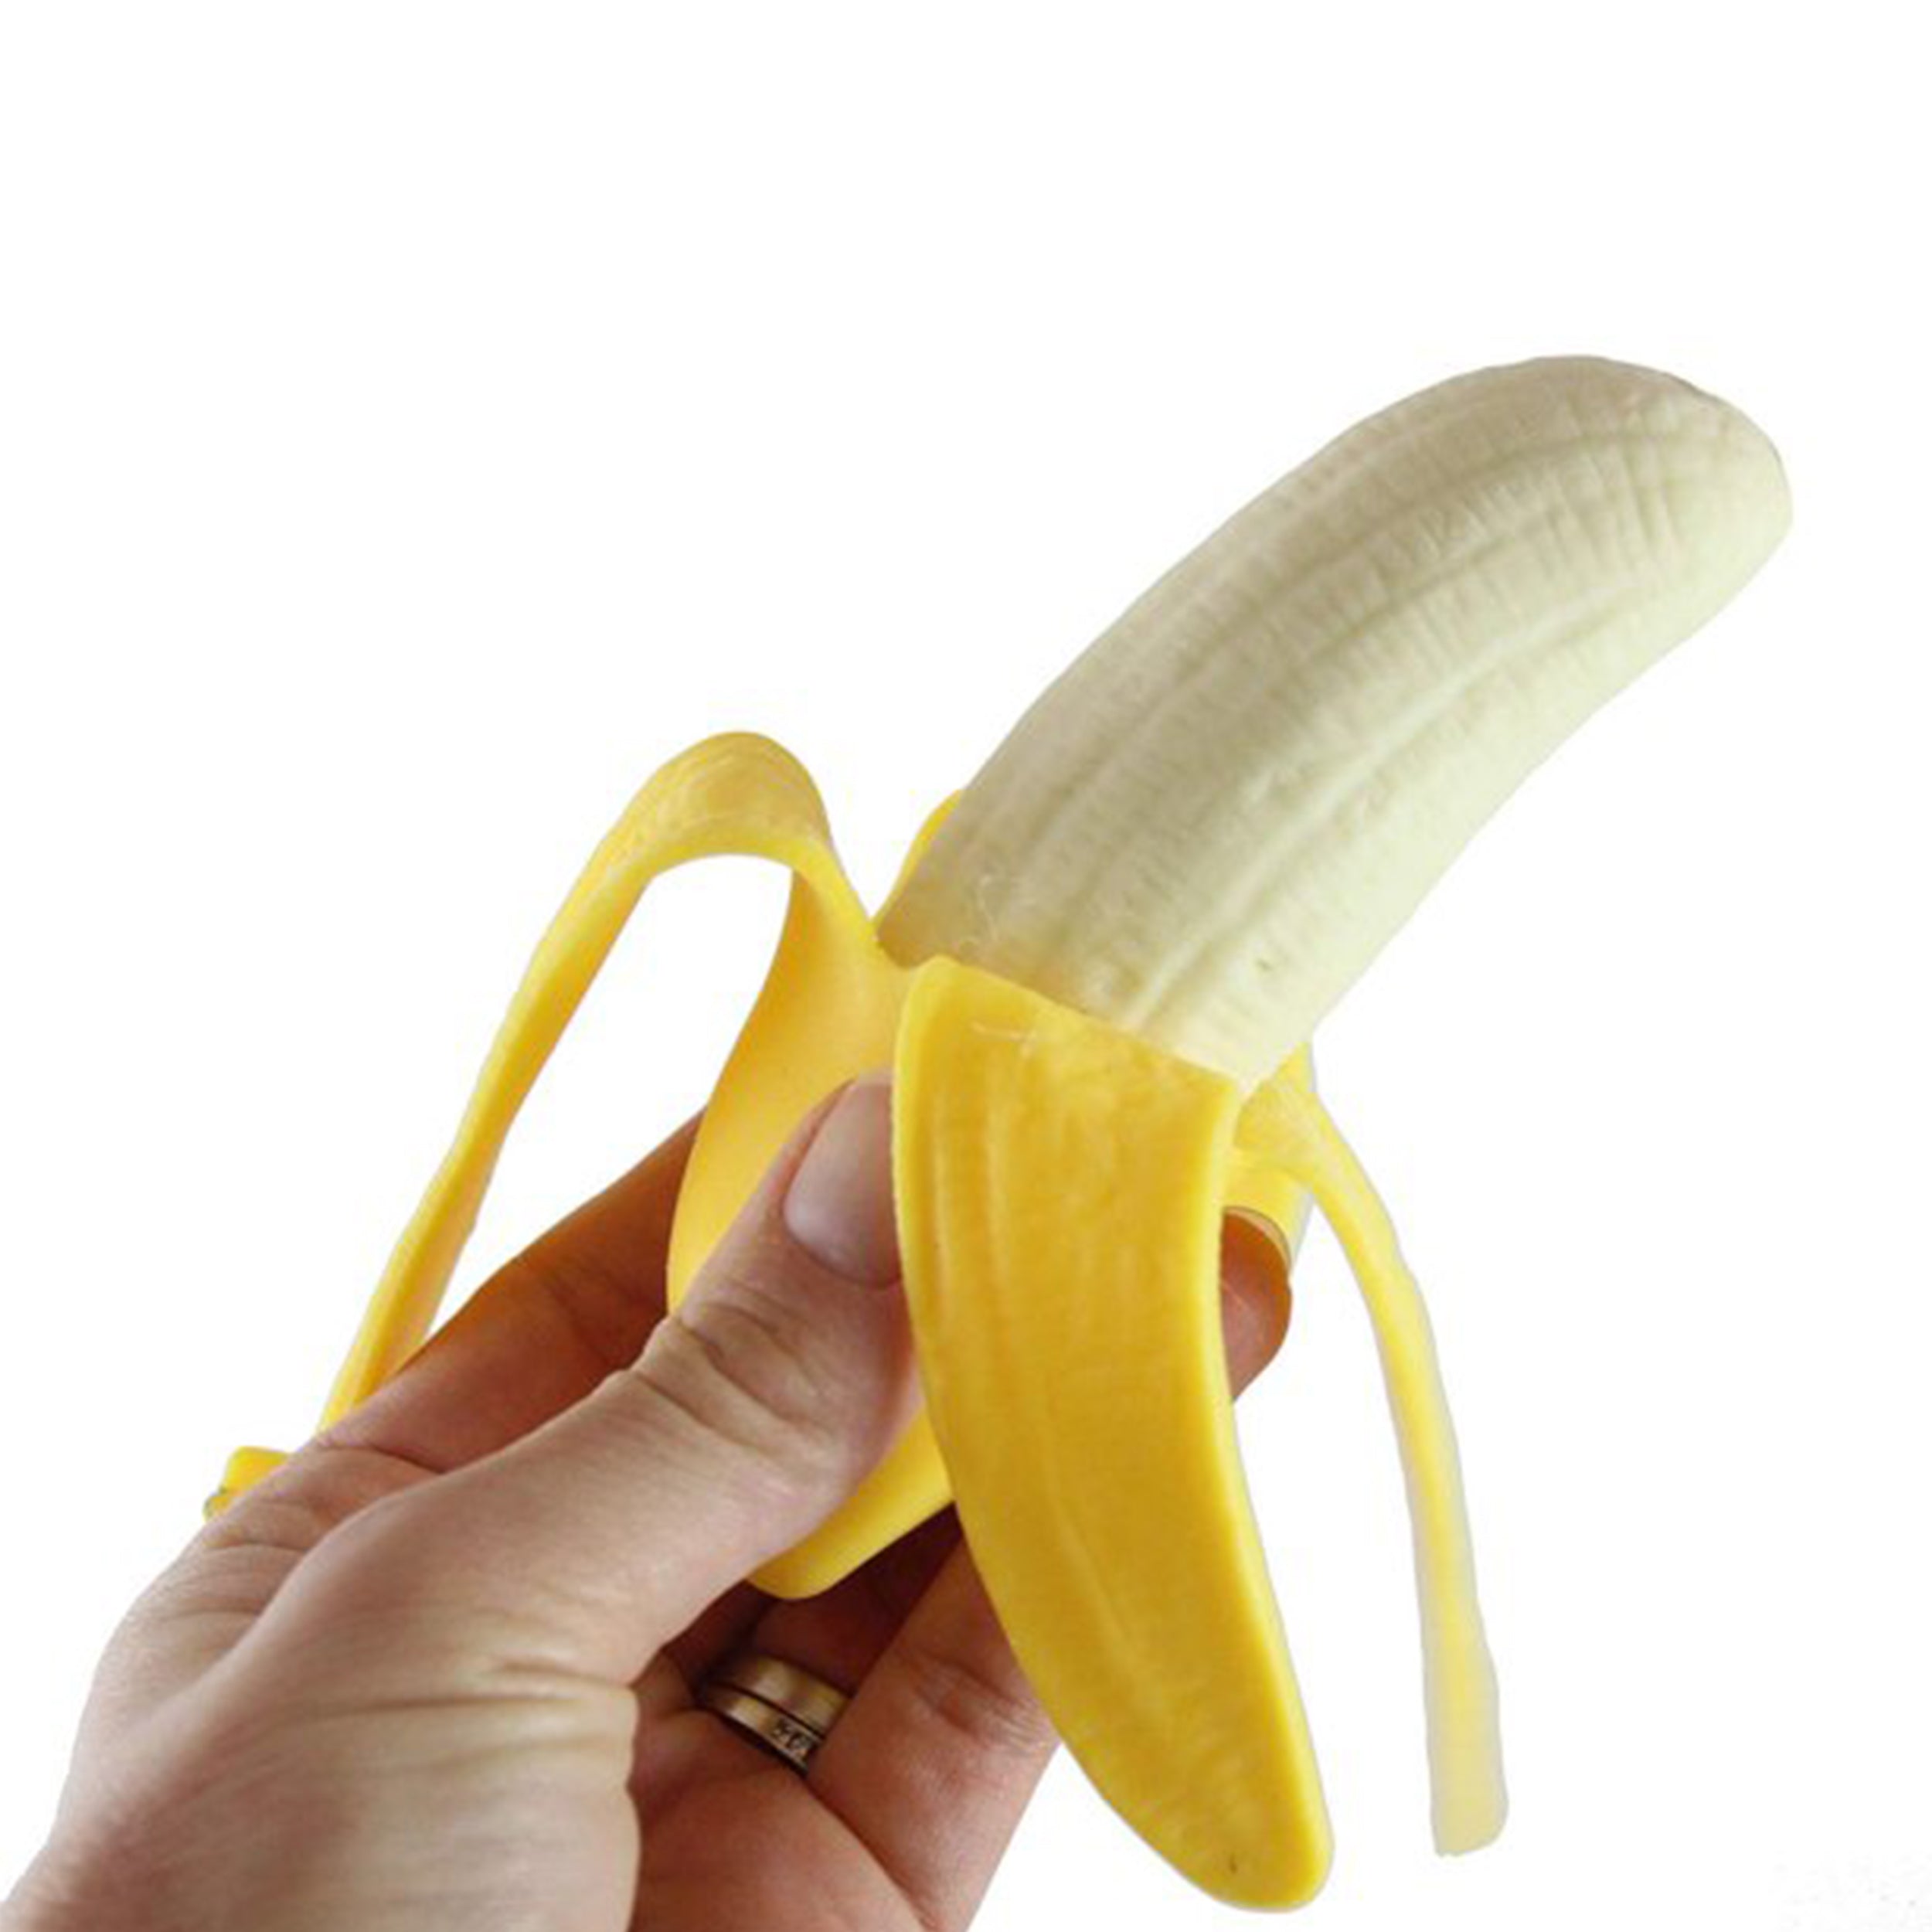 Stretchy Banana Stress Reliever Toy